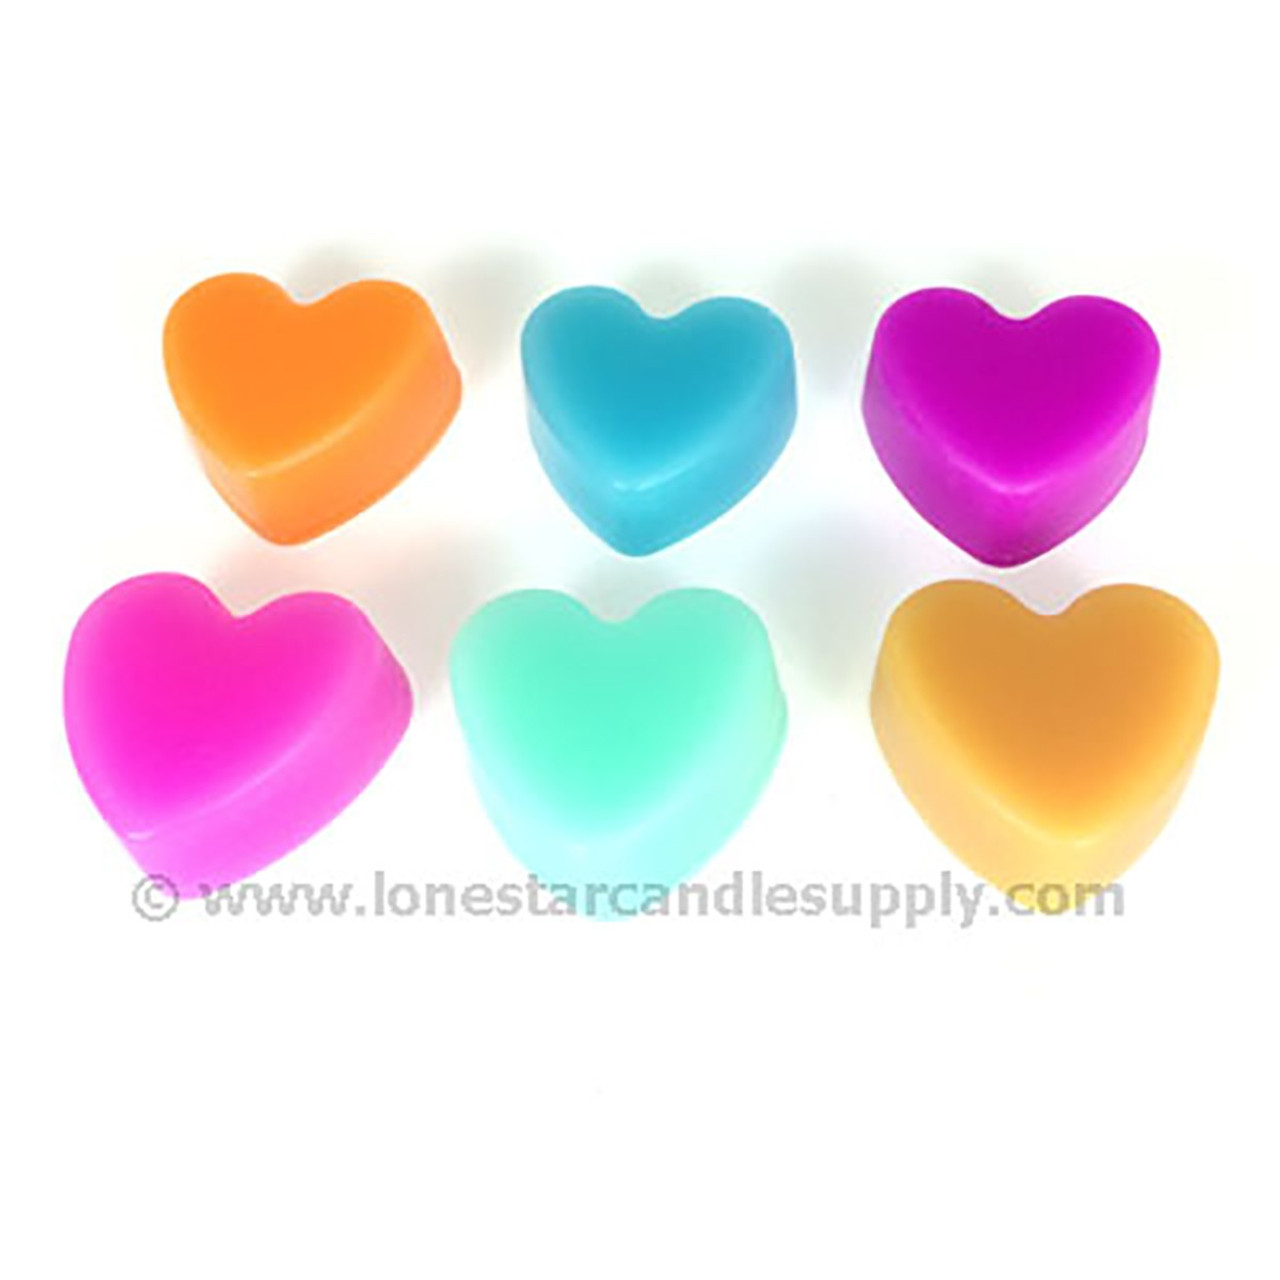 Heart Silicone Mold - 24 Cavity - Lone Star Candle Supply